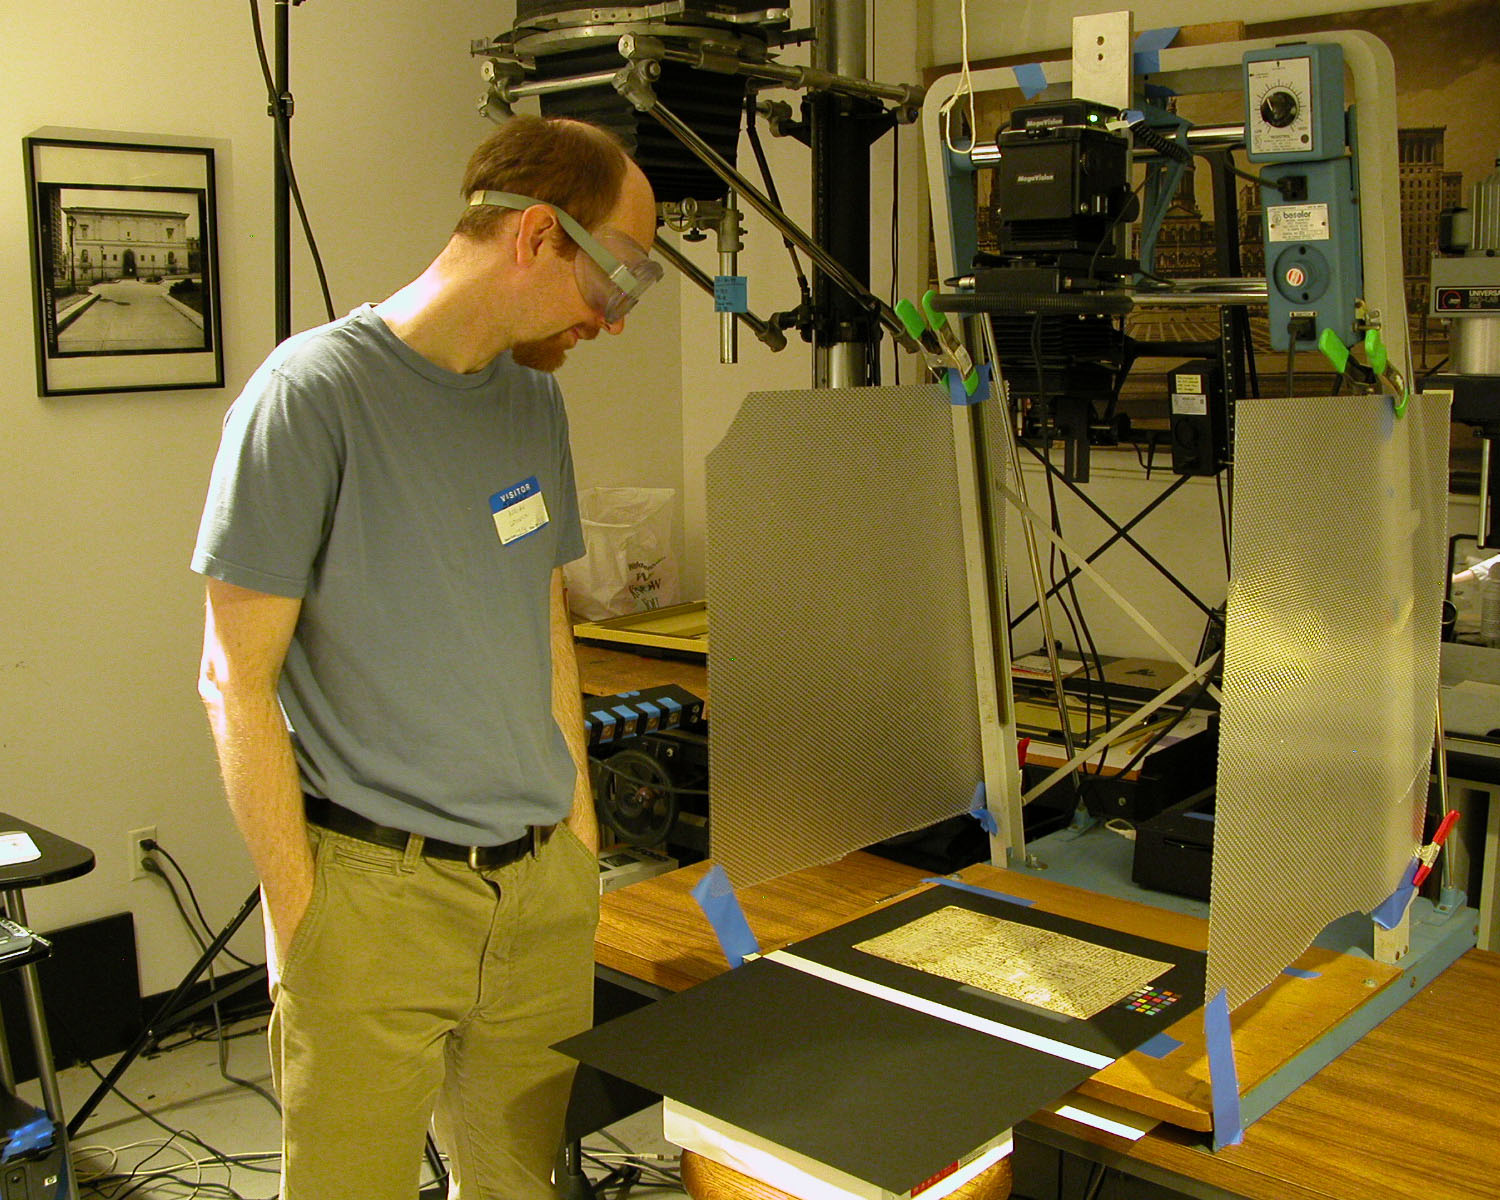 Project director Adrian S. Wisnicki examines the letter and capture station just before imaging begins. Copyright Adrian S. Wisnicki. Creative Commons Attribution-NonCommercial 3.0 Unported (https://creativecommons.org/licenses/by-nc/3.0/).